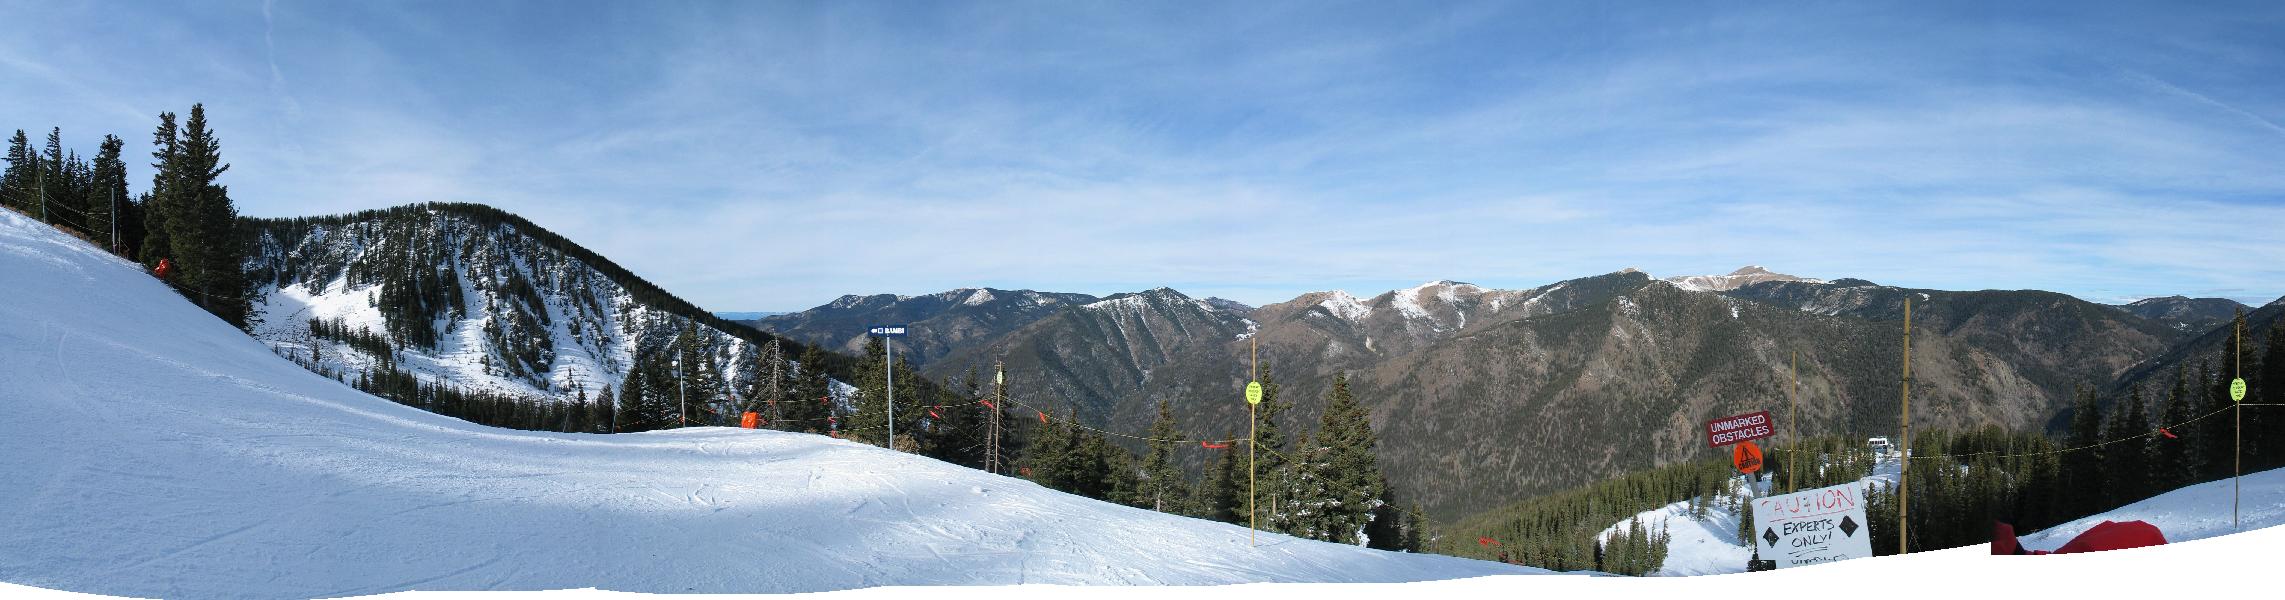 Panorama at the top of a double black diamond, Taos Valley Ski Area